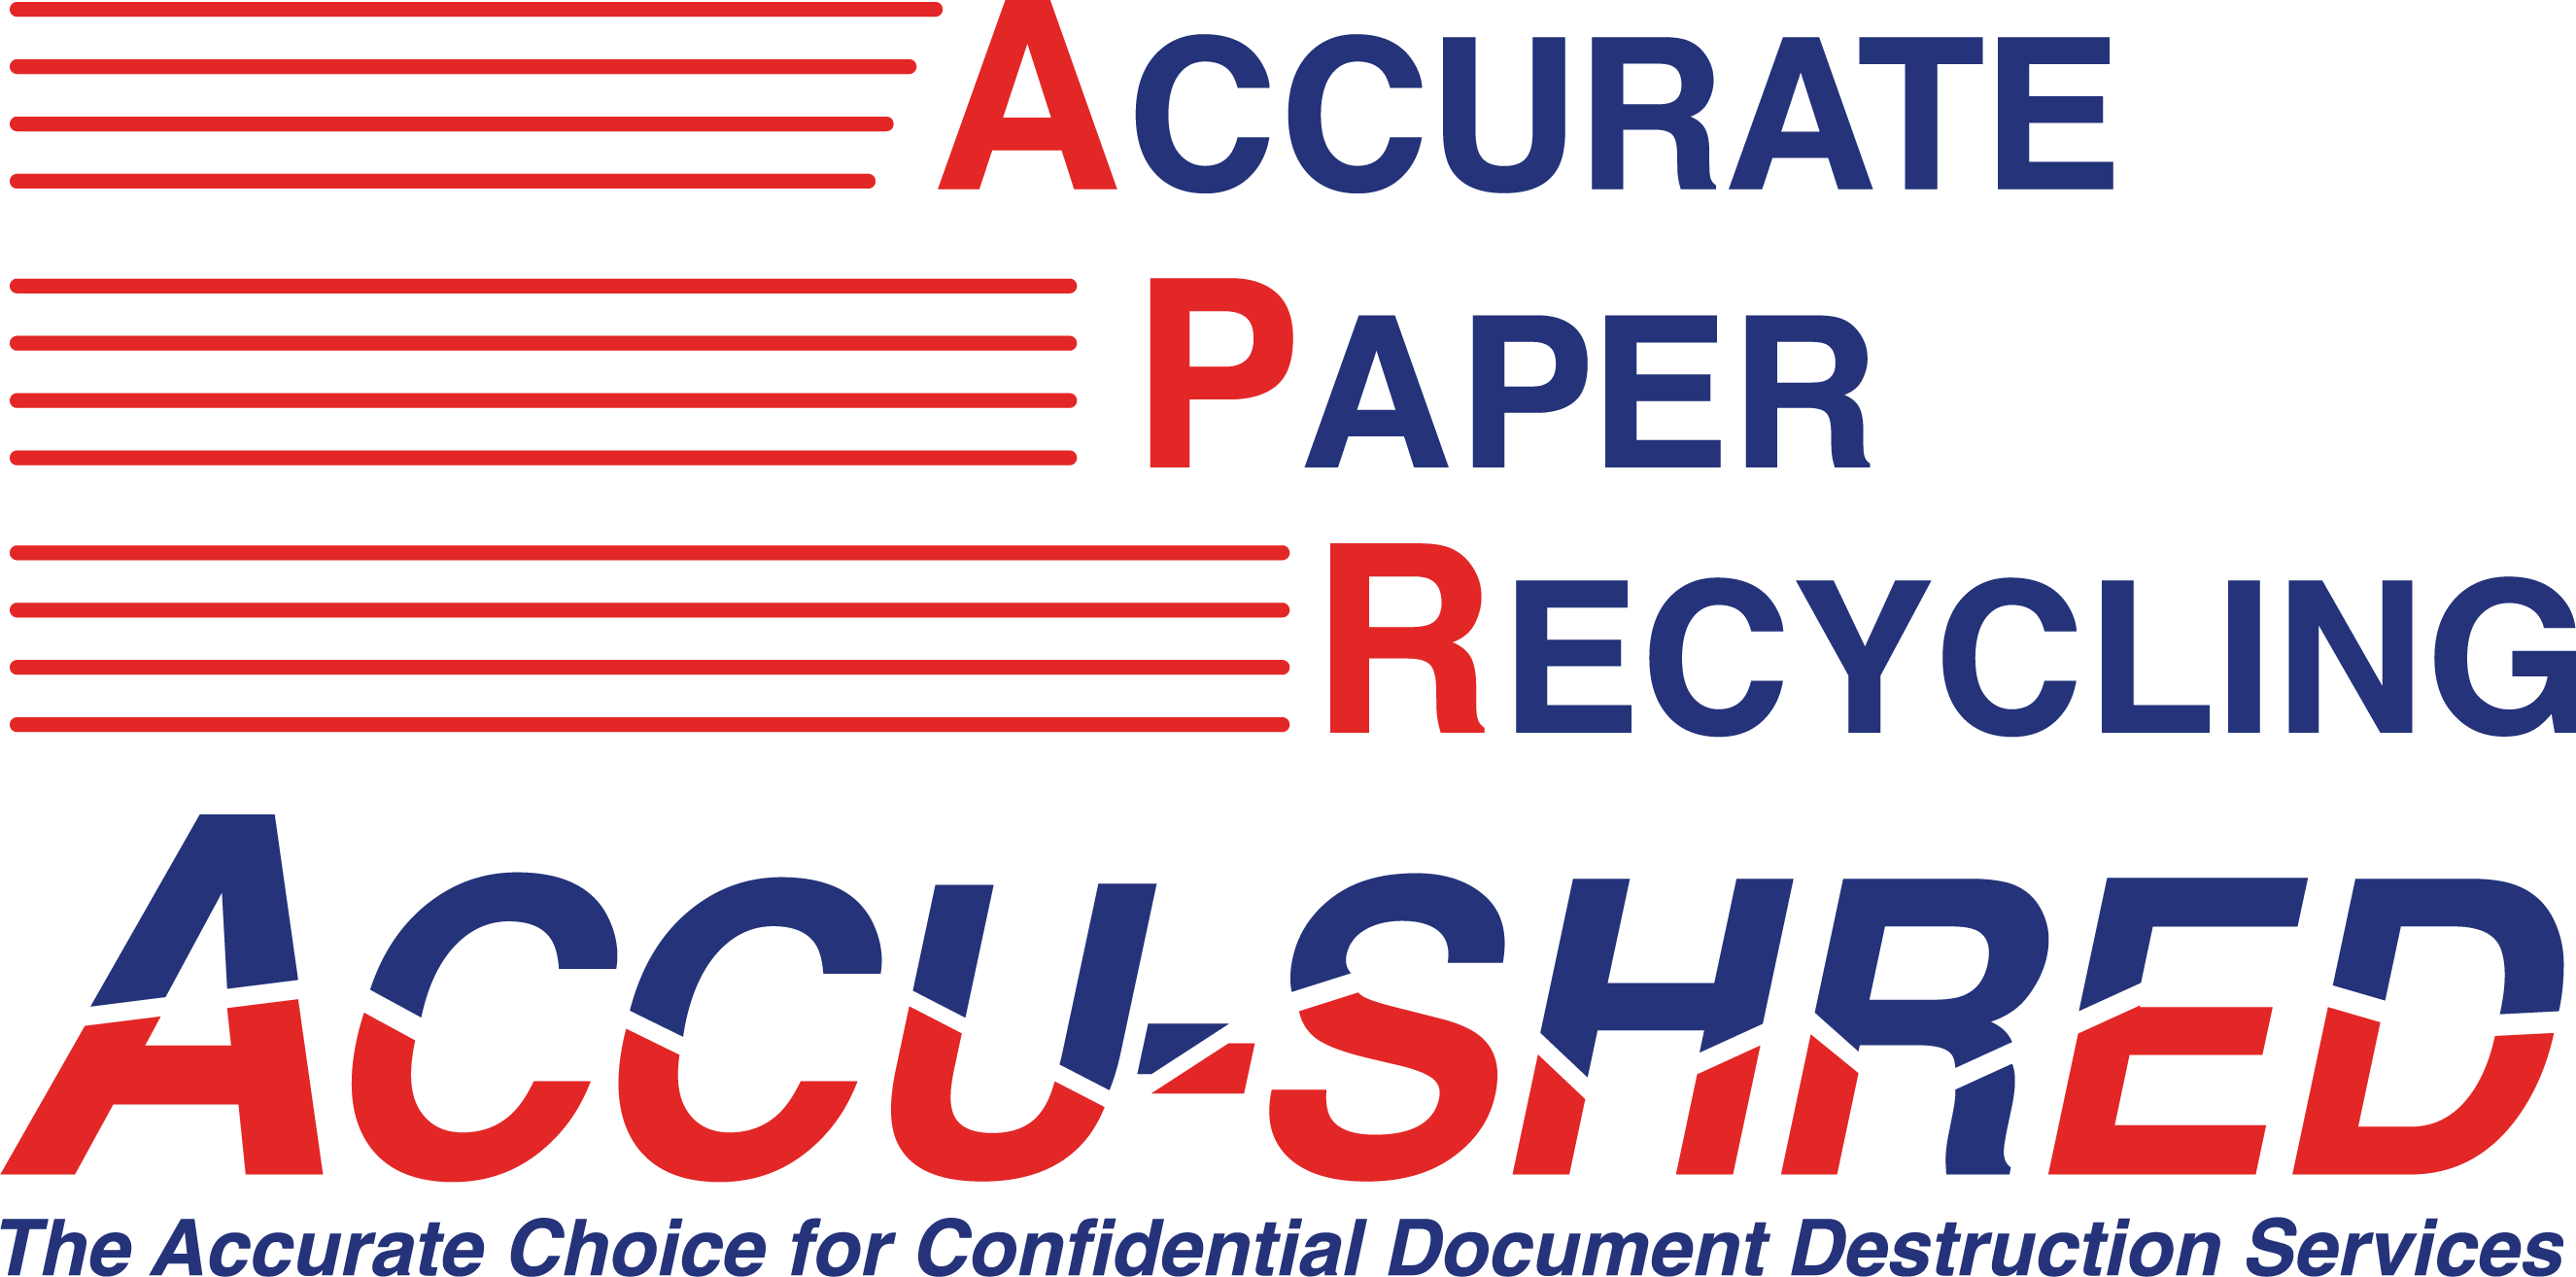 red and blue logo of accurate paper recycling and accushred